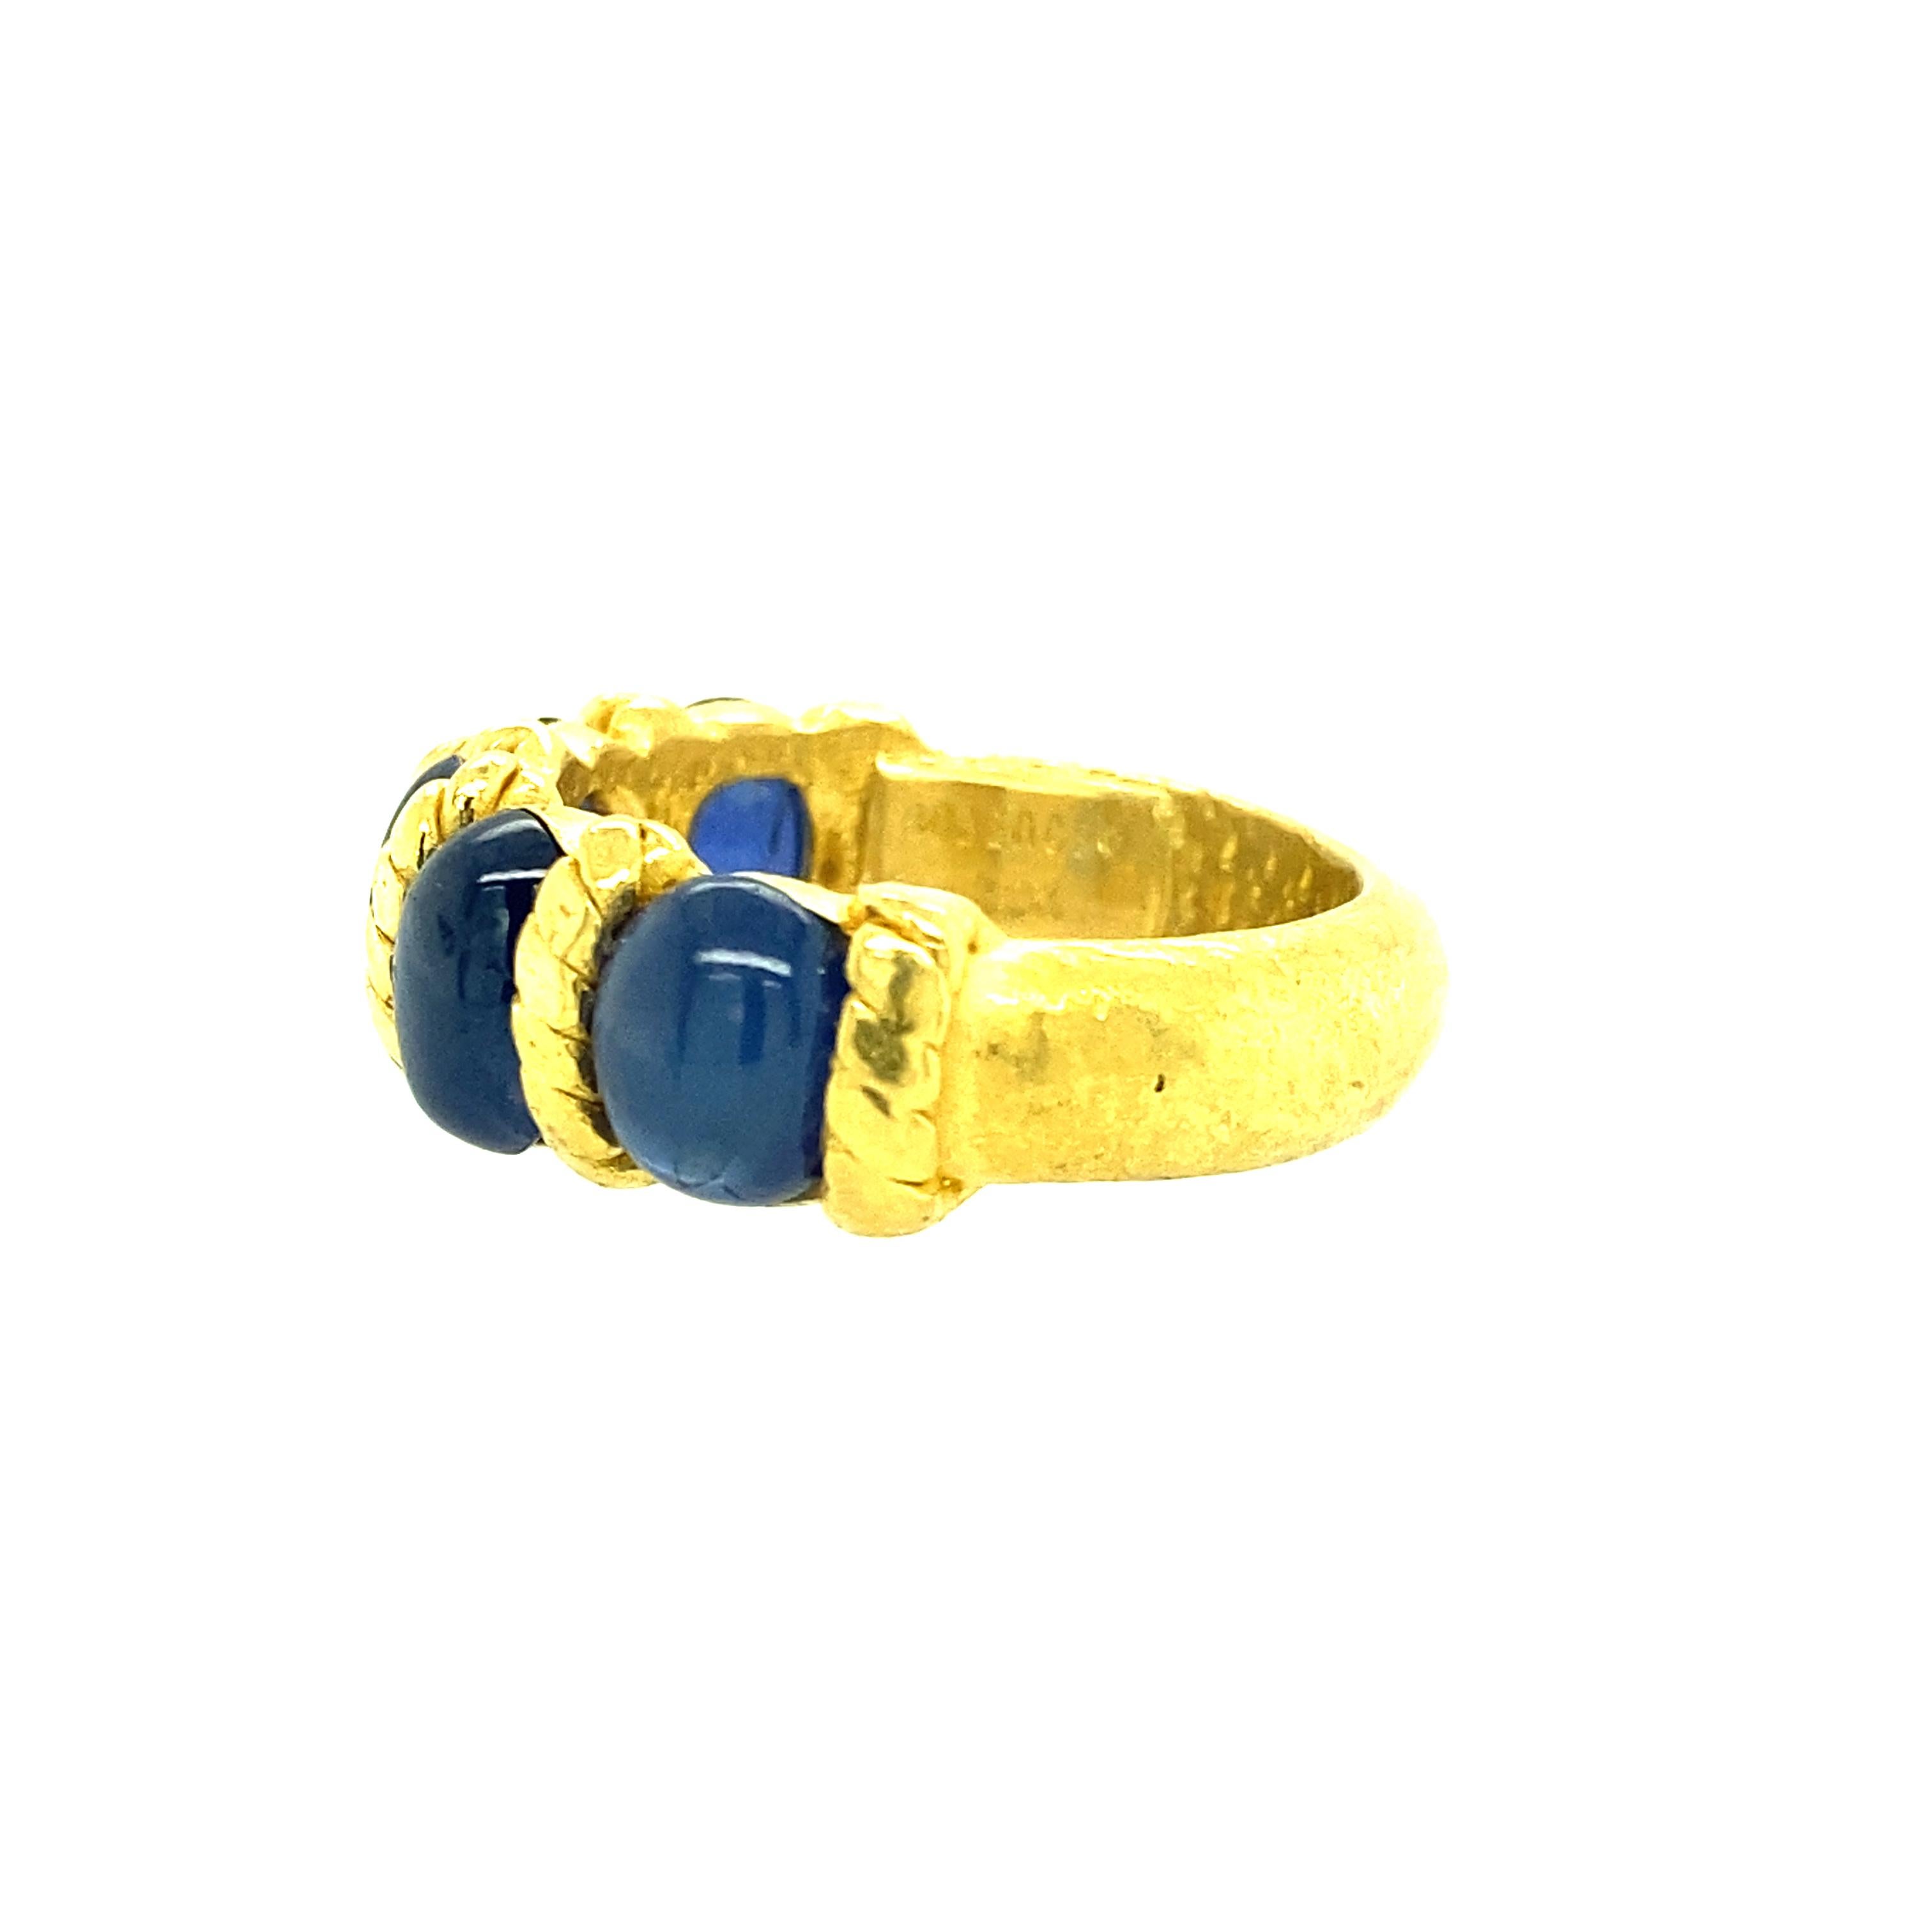 One 22 karat yellow gold (stamped 22K) ring set with five 7X5 natural blue oval sapphires by Denise Roberge.  The shank measures 5.17mm near the top of the ring and tapers to 5.03mm at the base. The ring weighs 13.66 grams and is a finger size 7.75.